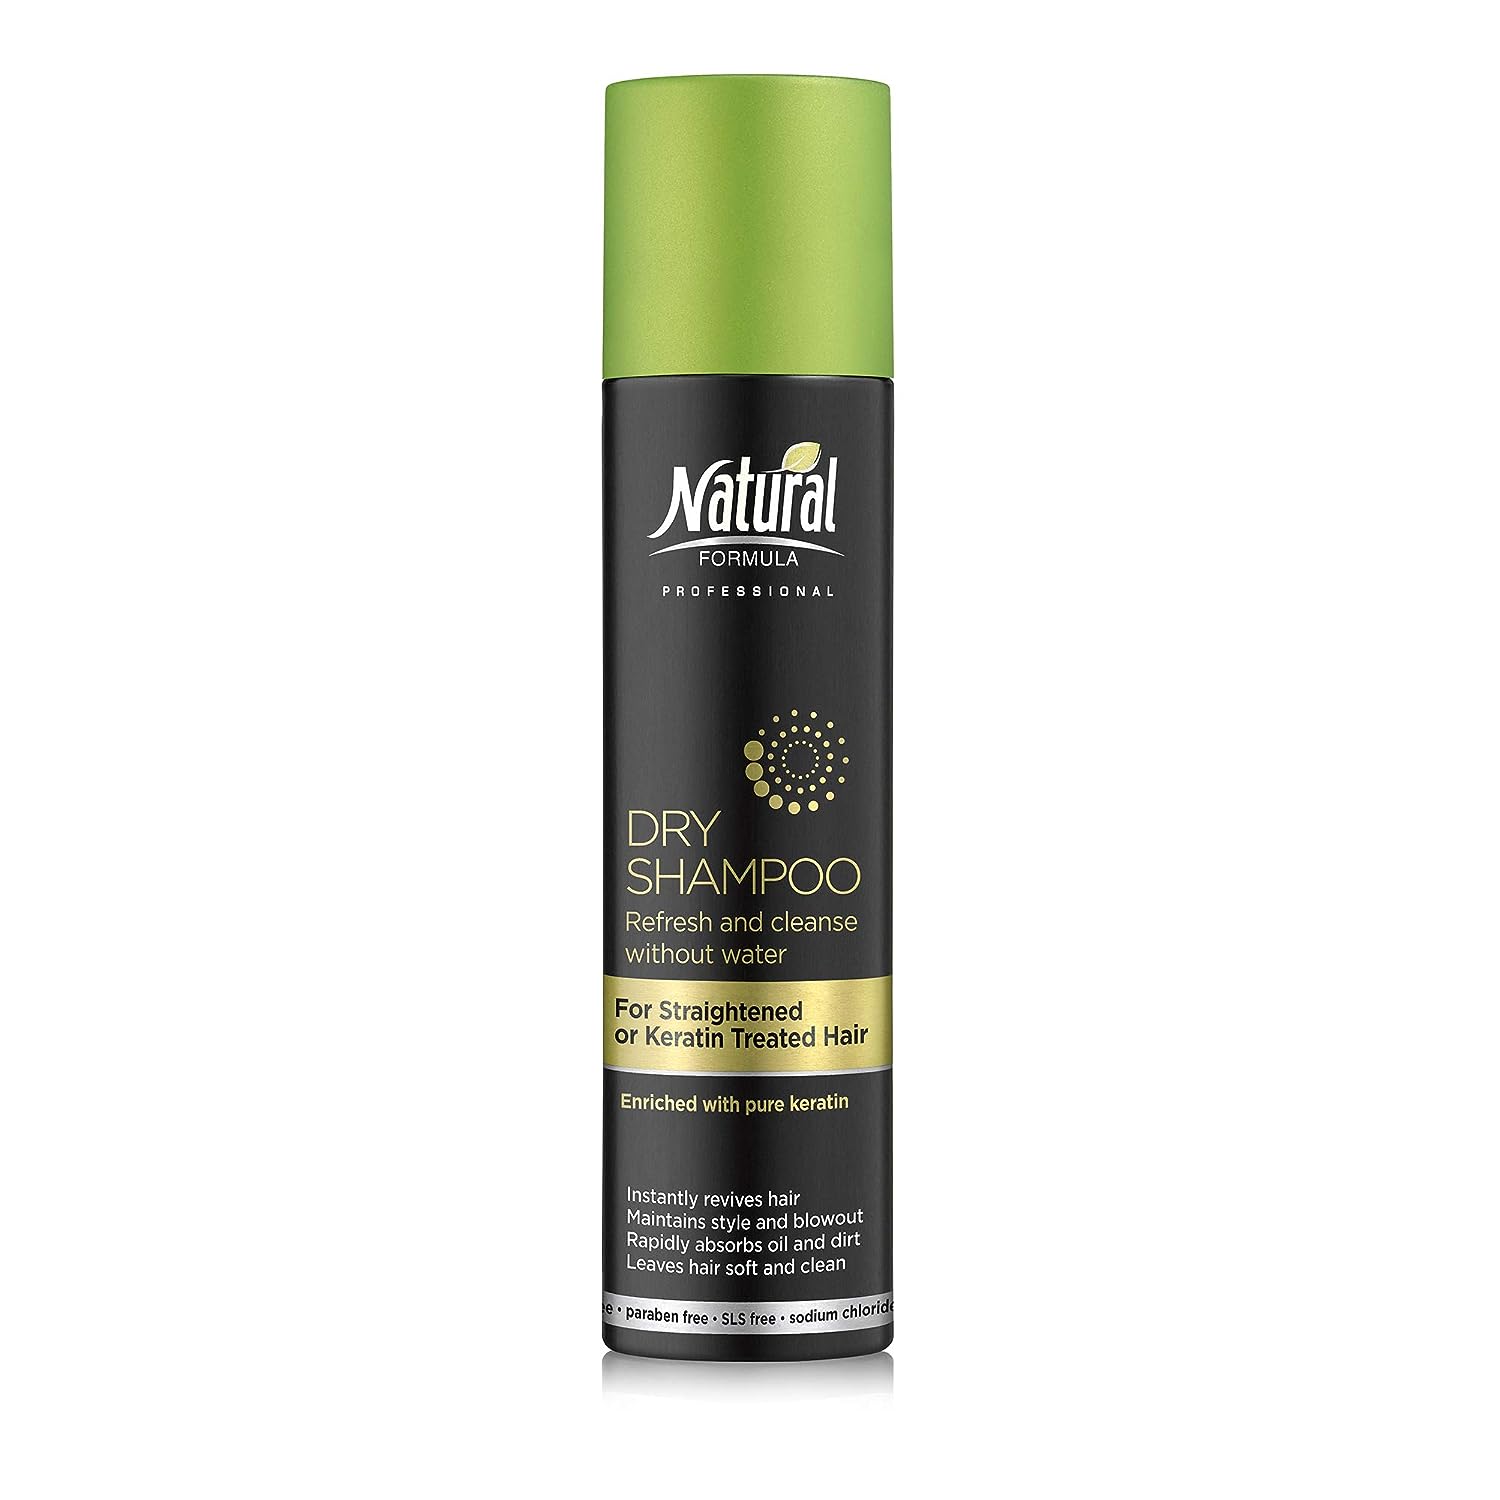 dry shampoo for keratin treated hair detailed review